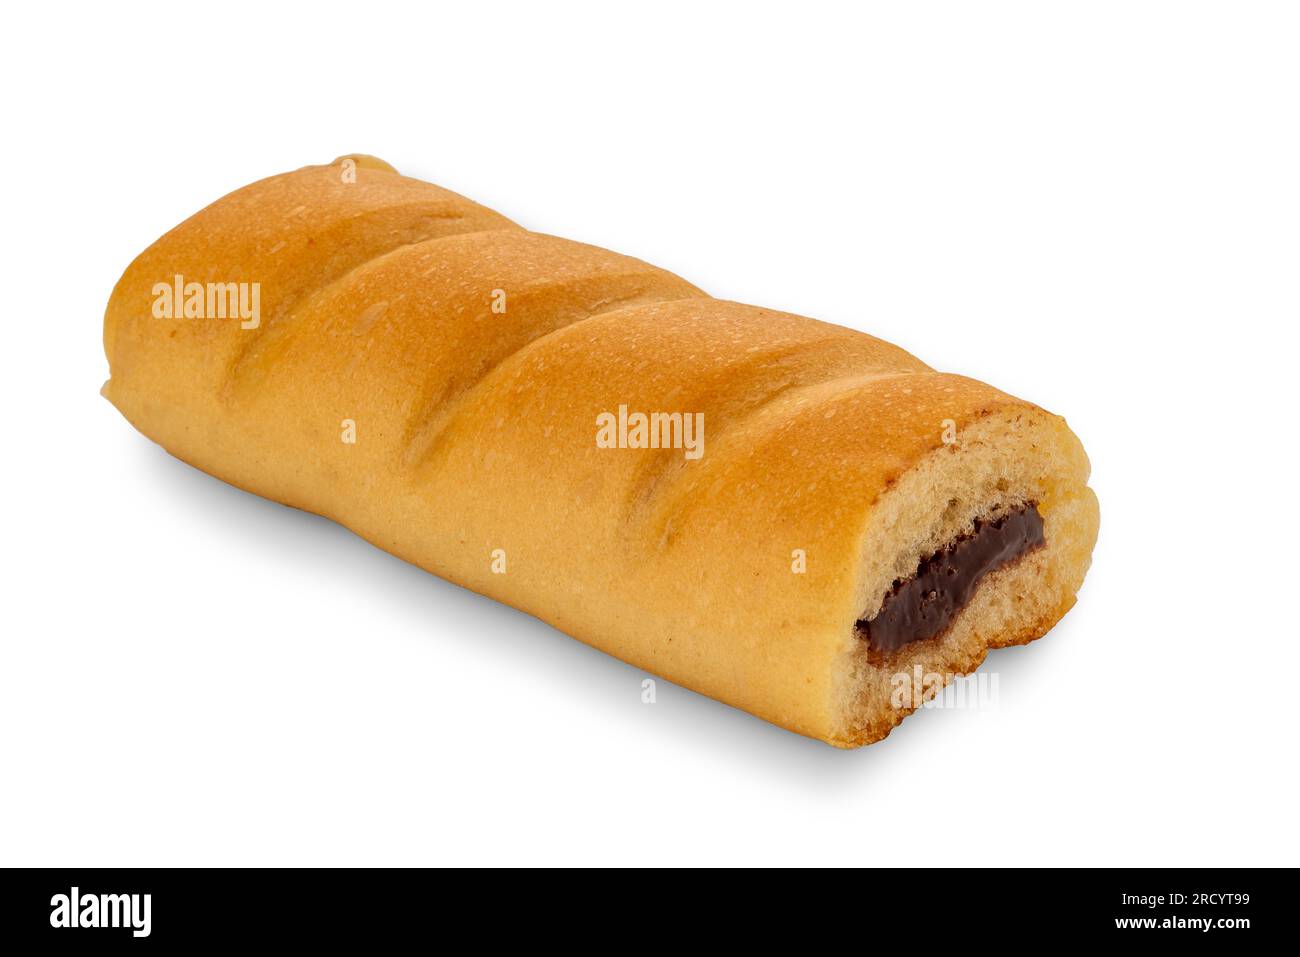 Sponge cake snack filled with chocolate isolated on white with clipping path included Stock Photo